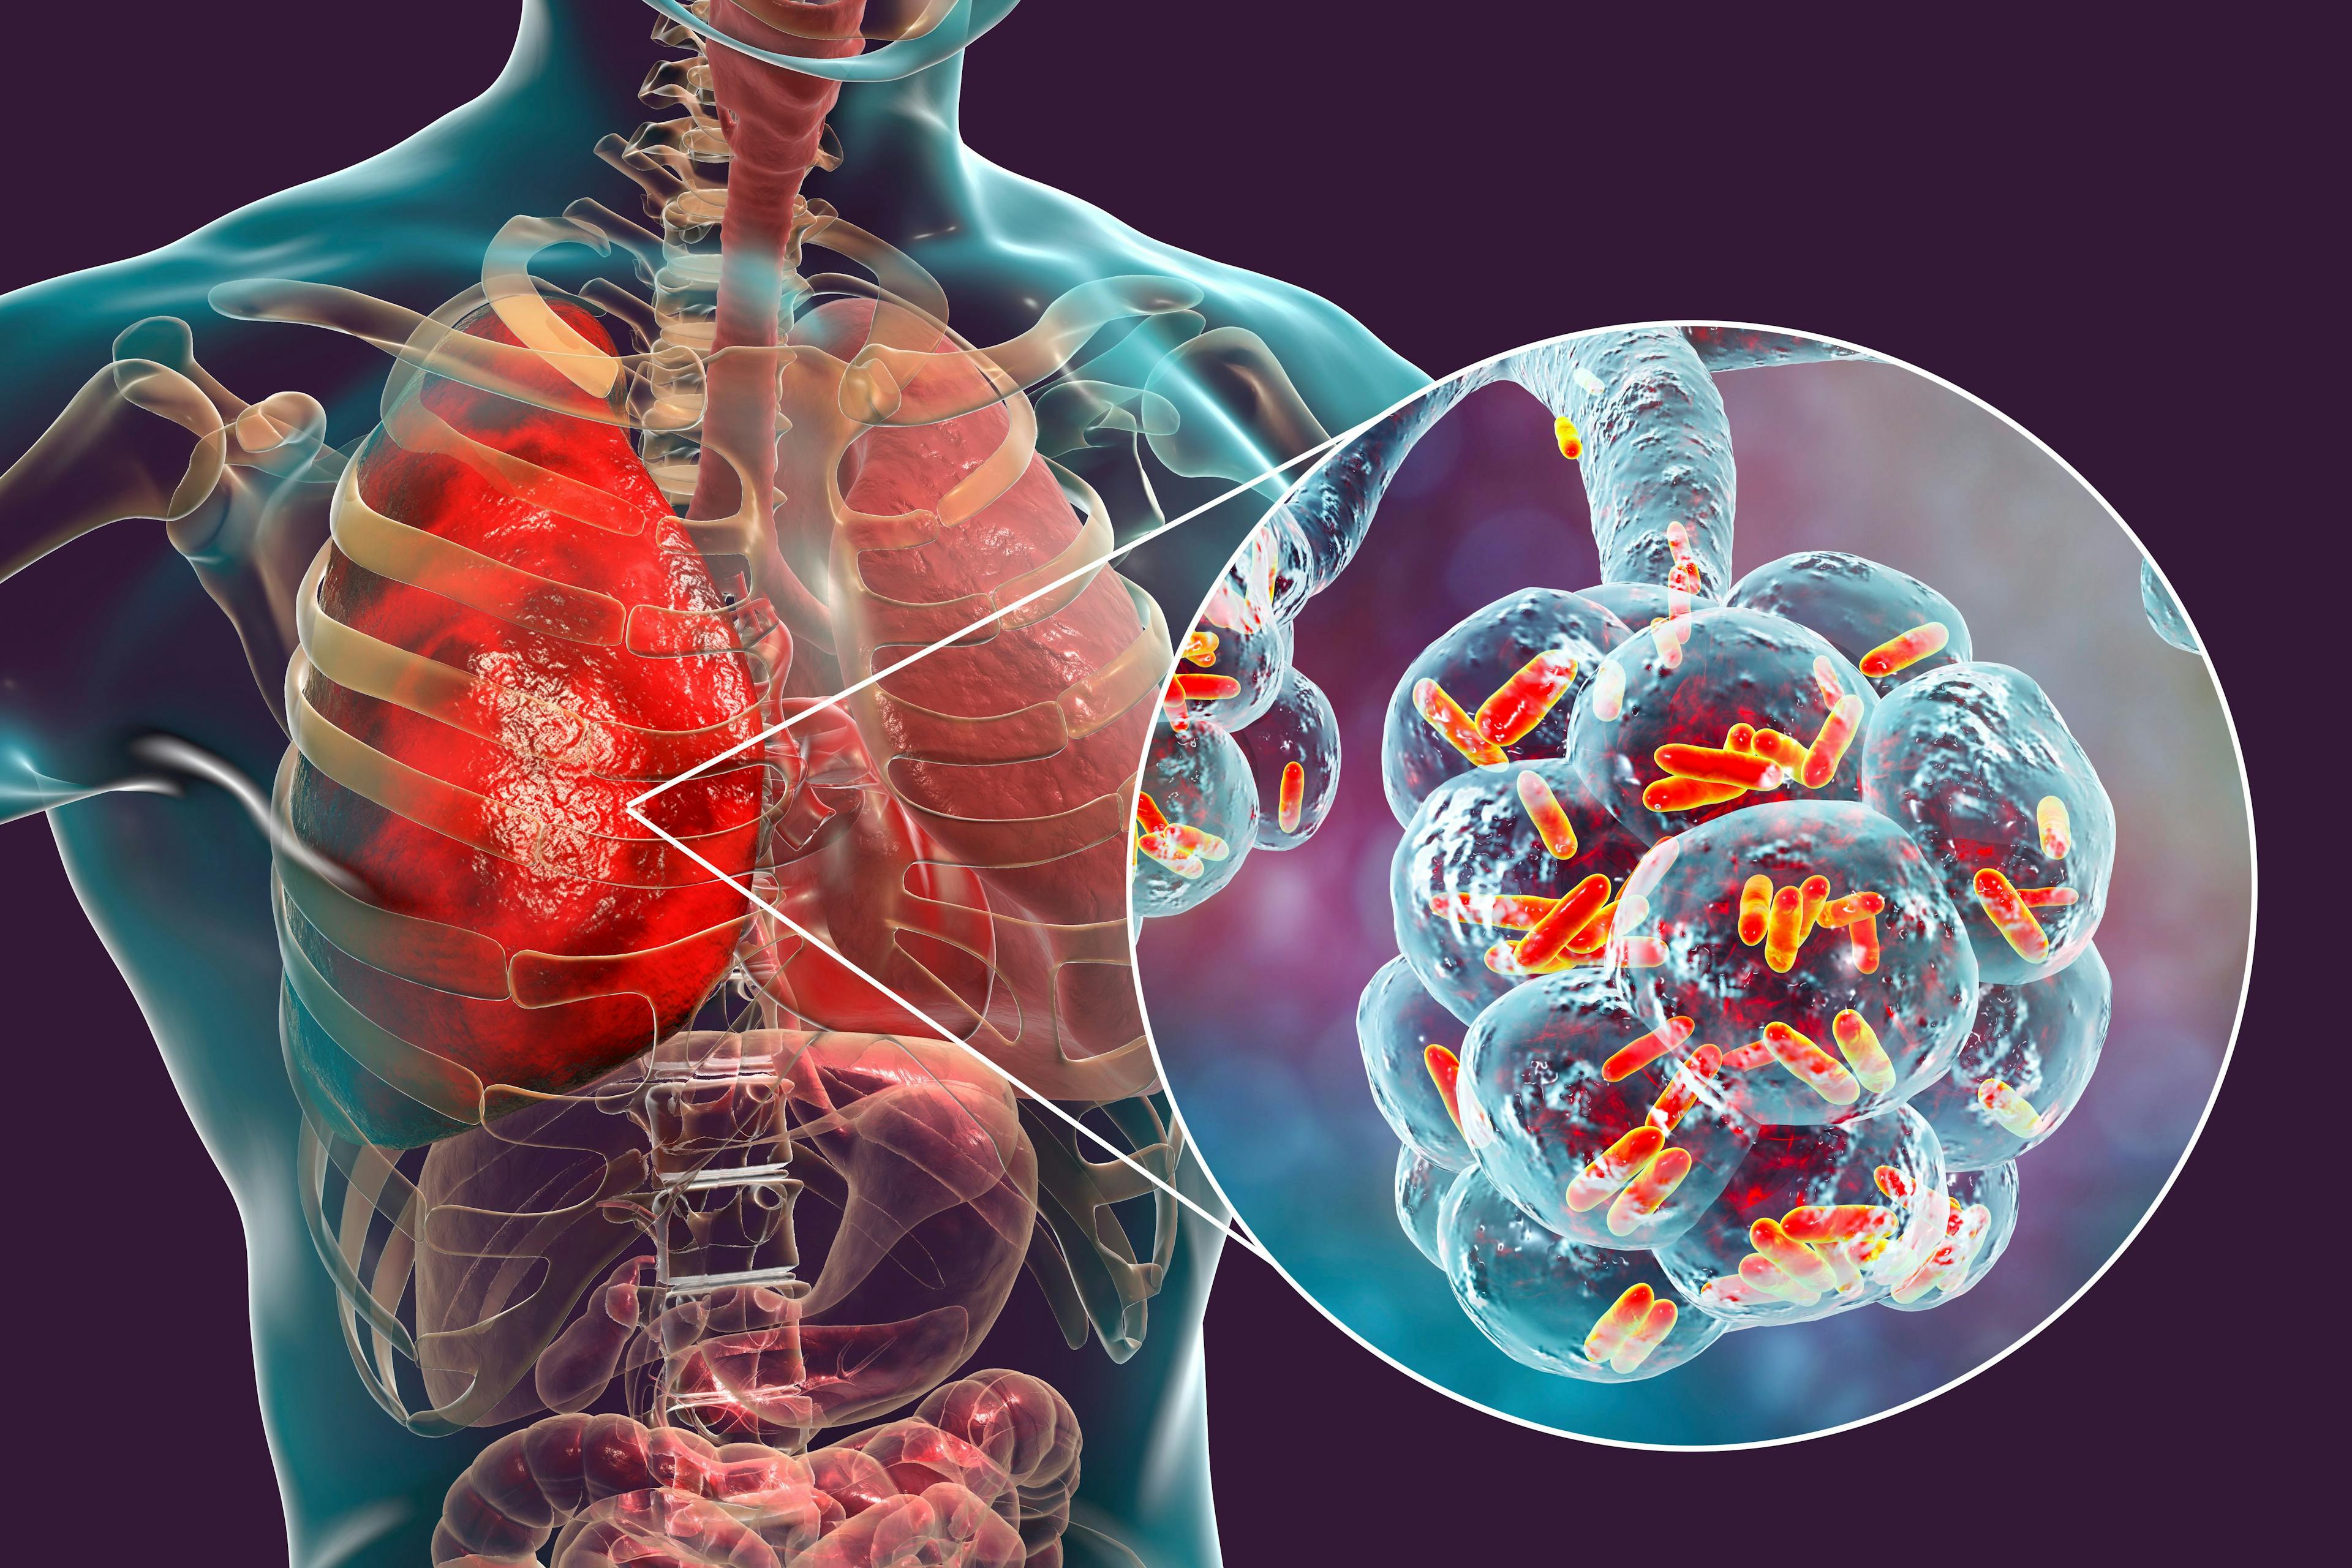 Bacterial pneumonia, medical concept. 3D illustration showing rod-shaped bacteria inside alveoli of the lung | Image Credit: Dr_Microbe - stock.adobe.com